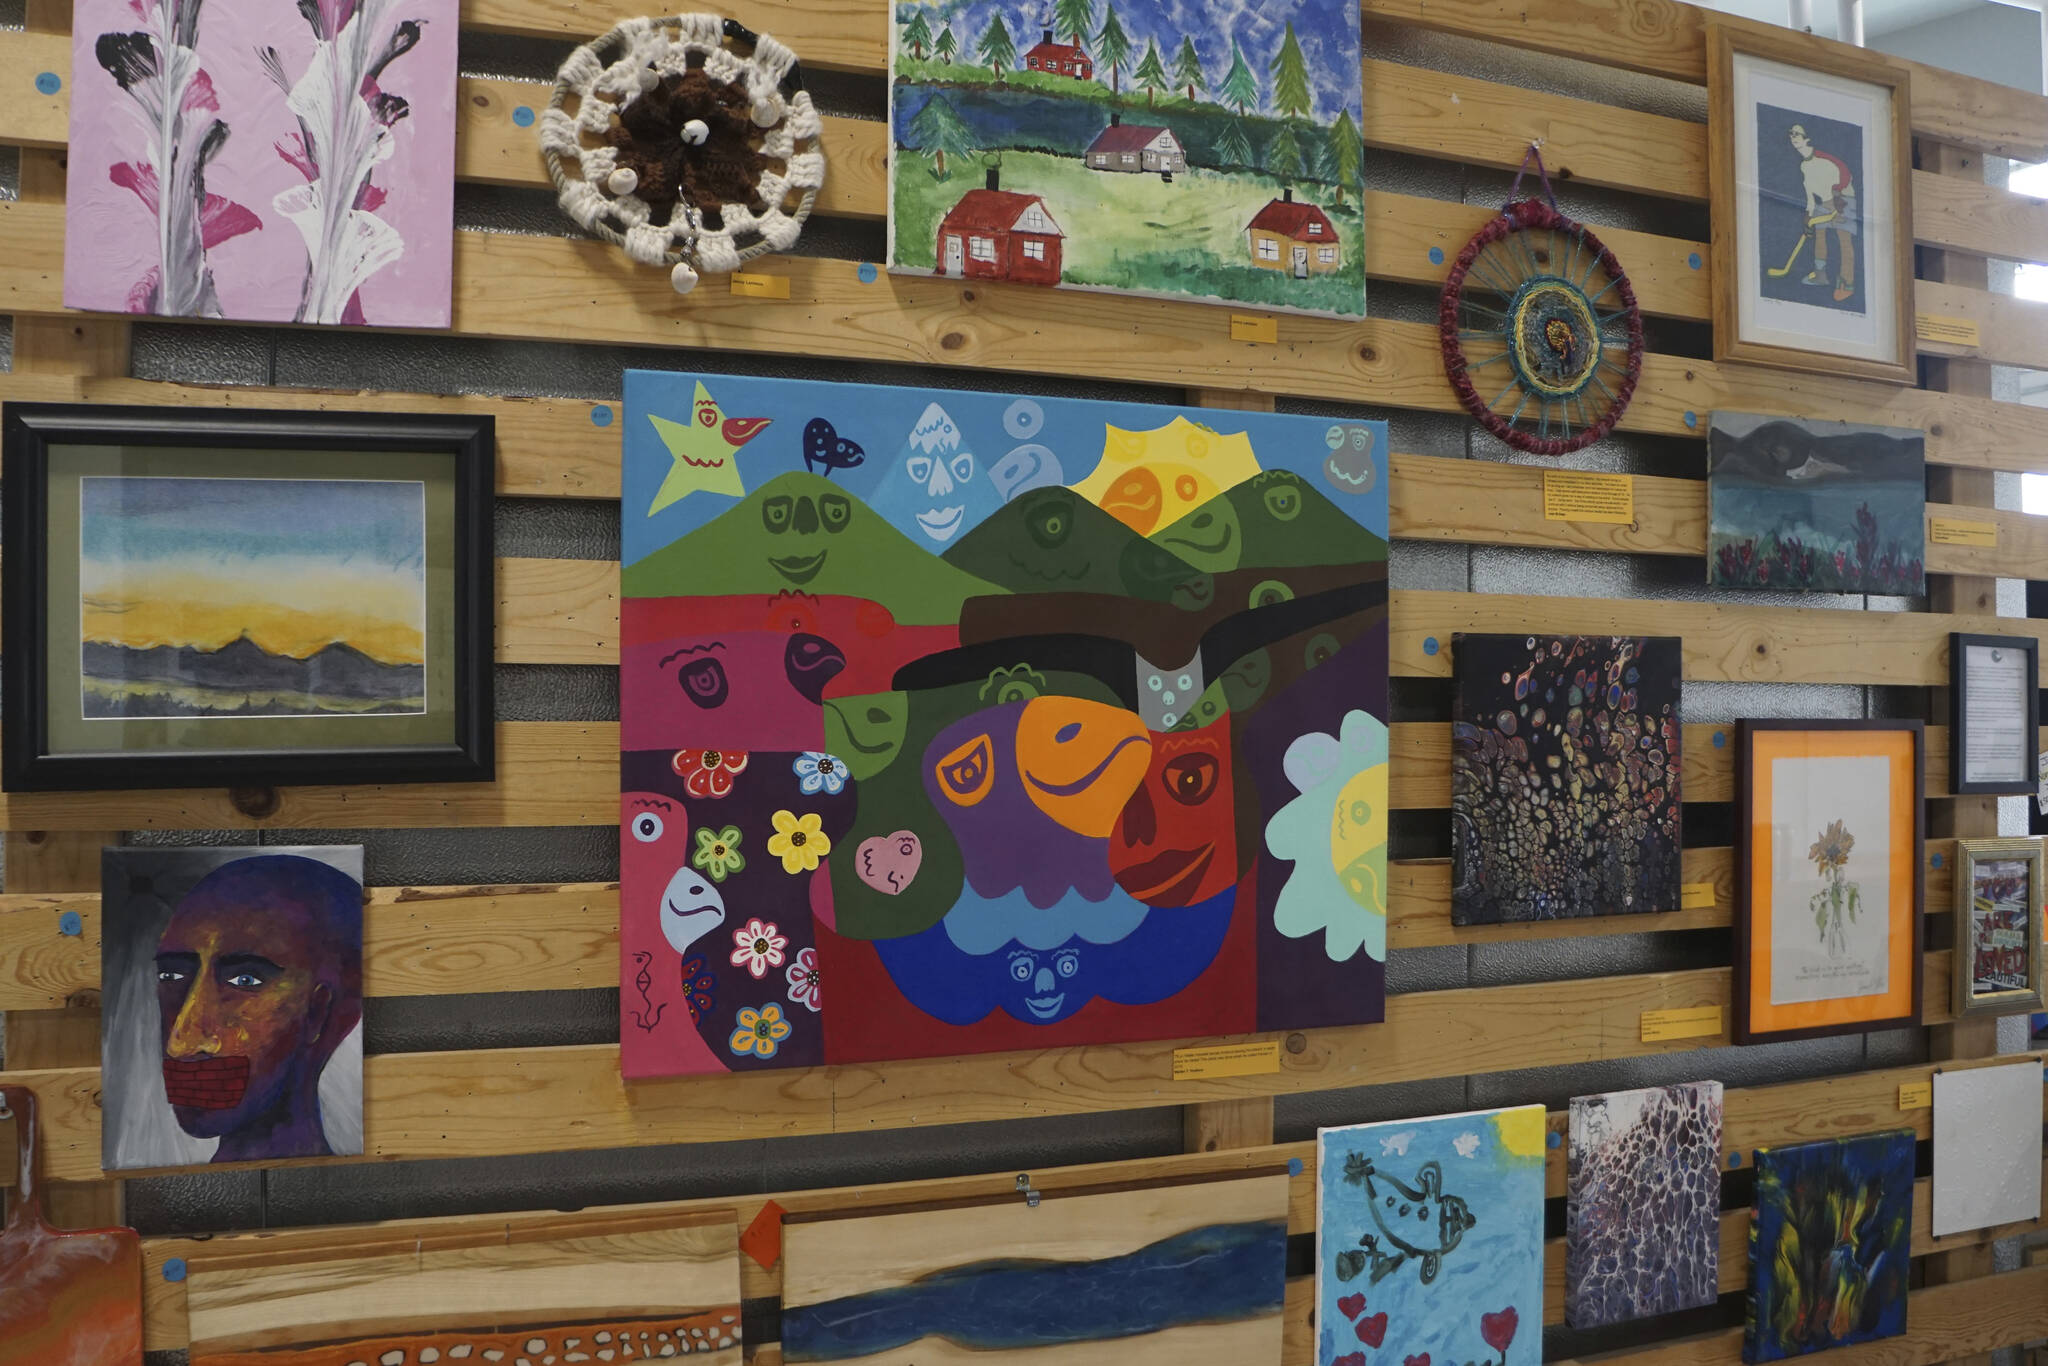 The Disability Pride Month art show, as seen on Friday, July 1, 2022, at Grace Ridge Brewing in Homer, Alaska. (Photo by Michael Armstrong/Homer News)